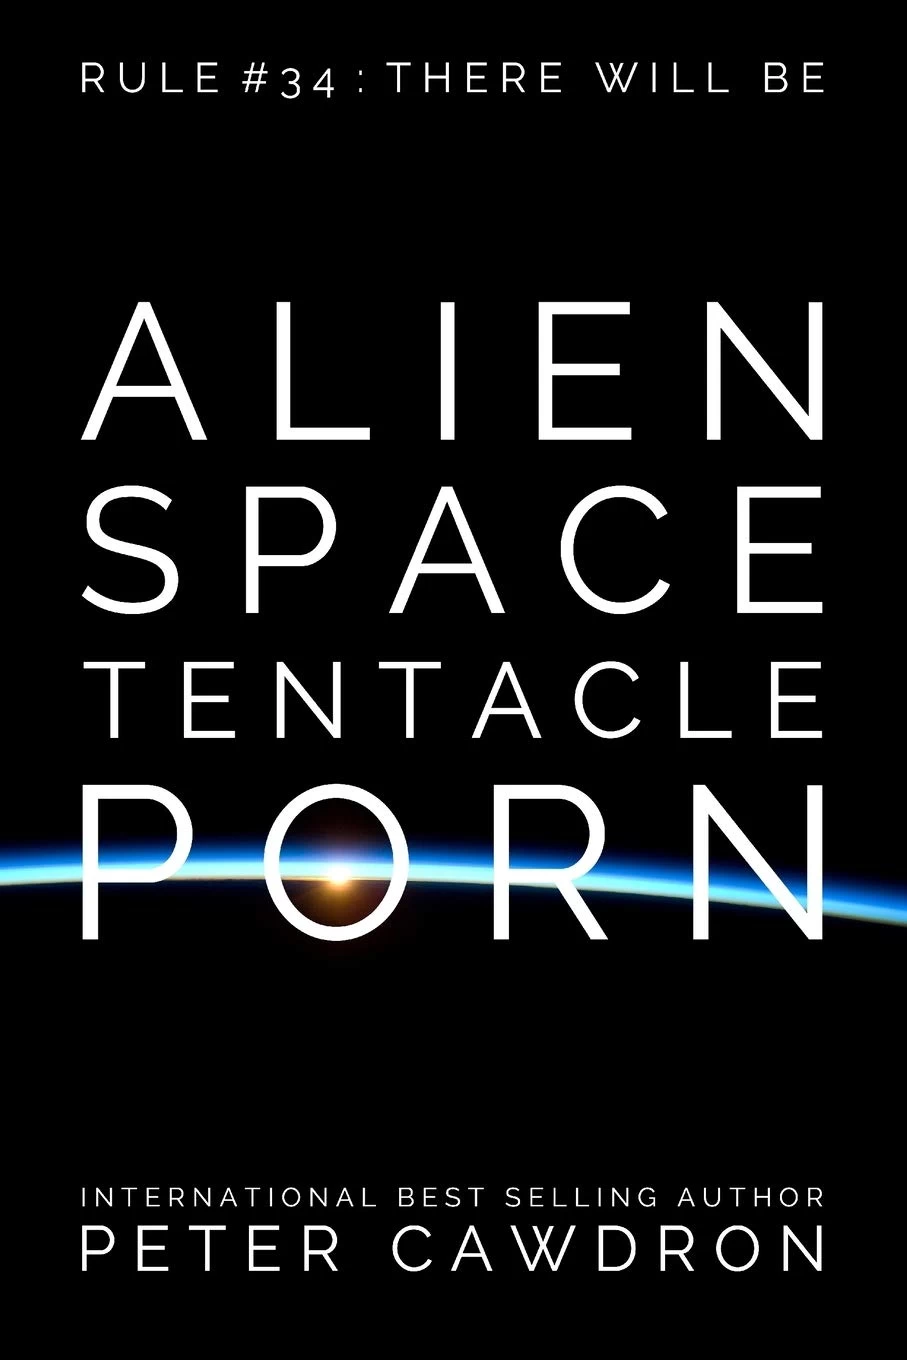 Alien Space Tentacle Porn by Peter Cawdron